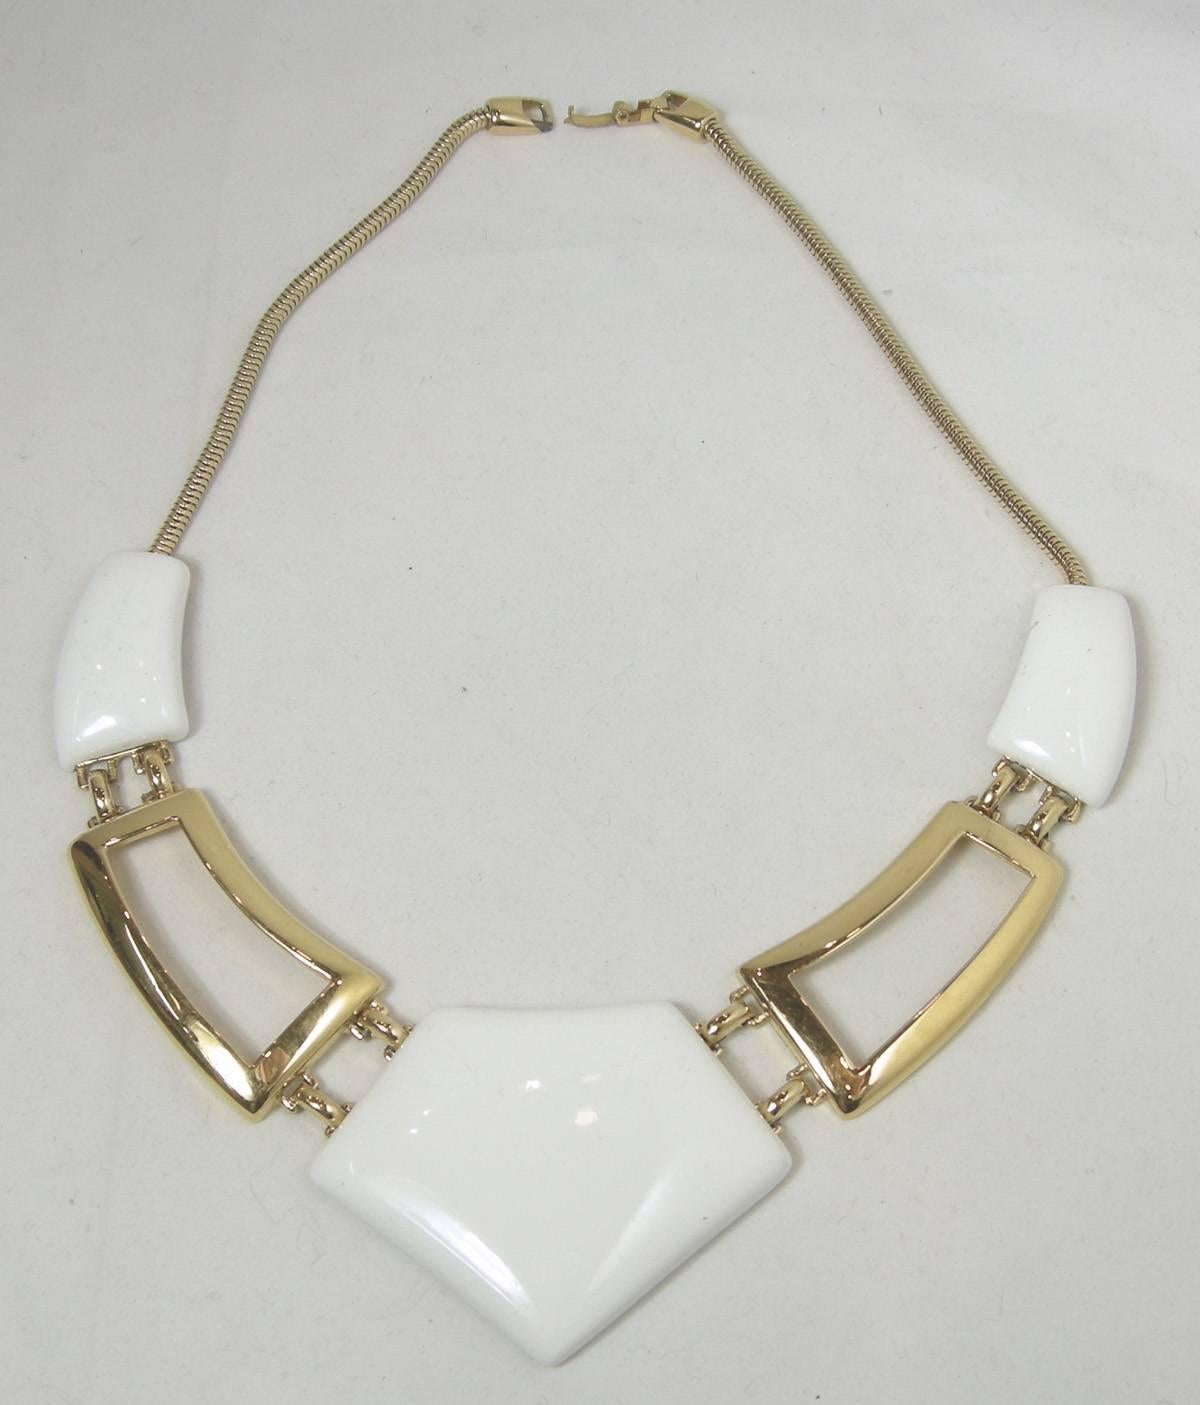 This Monet necklace is perfect for the summer.  It has a snake chain with a fold over clasp.  There are two curved white enamels elongated ovals attached to gold tone open work that attaches the white enamel centerpiece.  The necklace is 16” and the